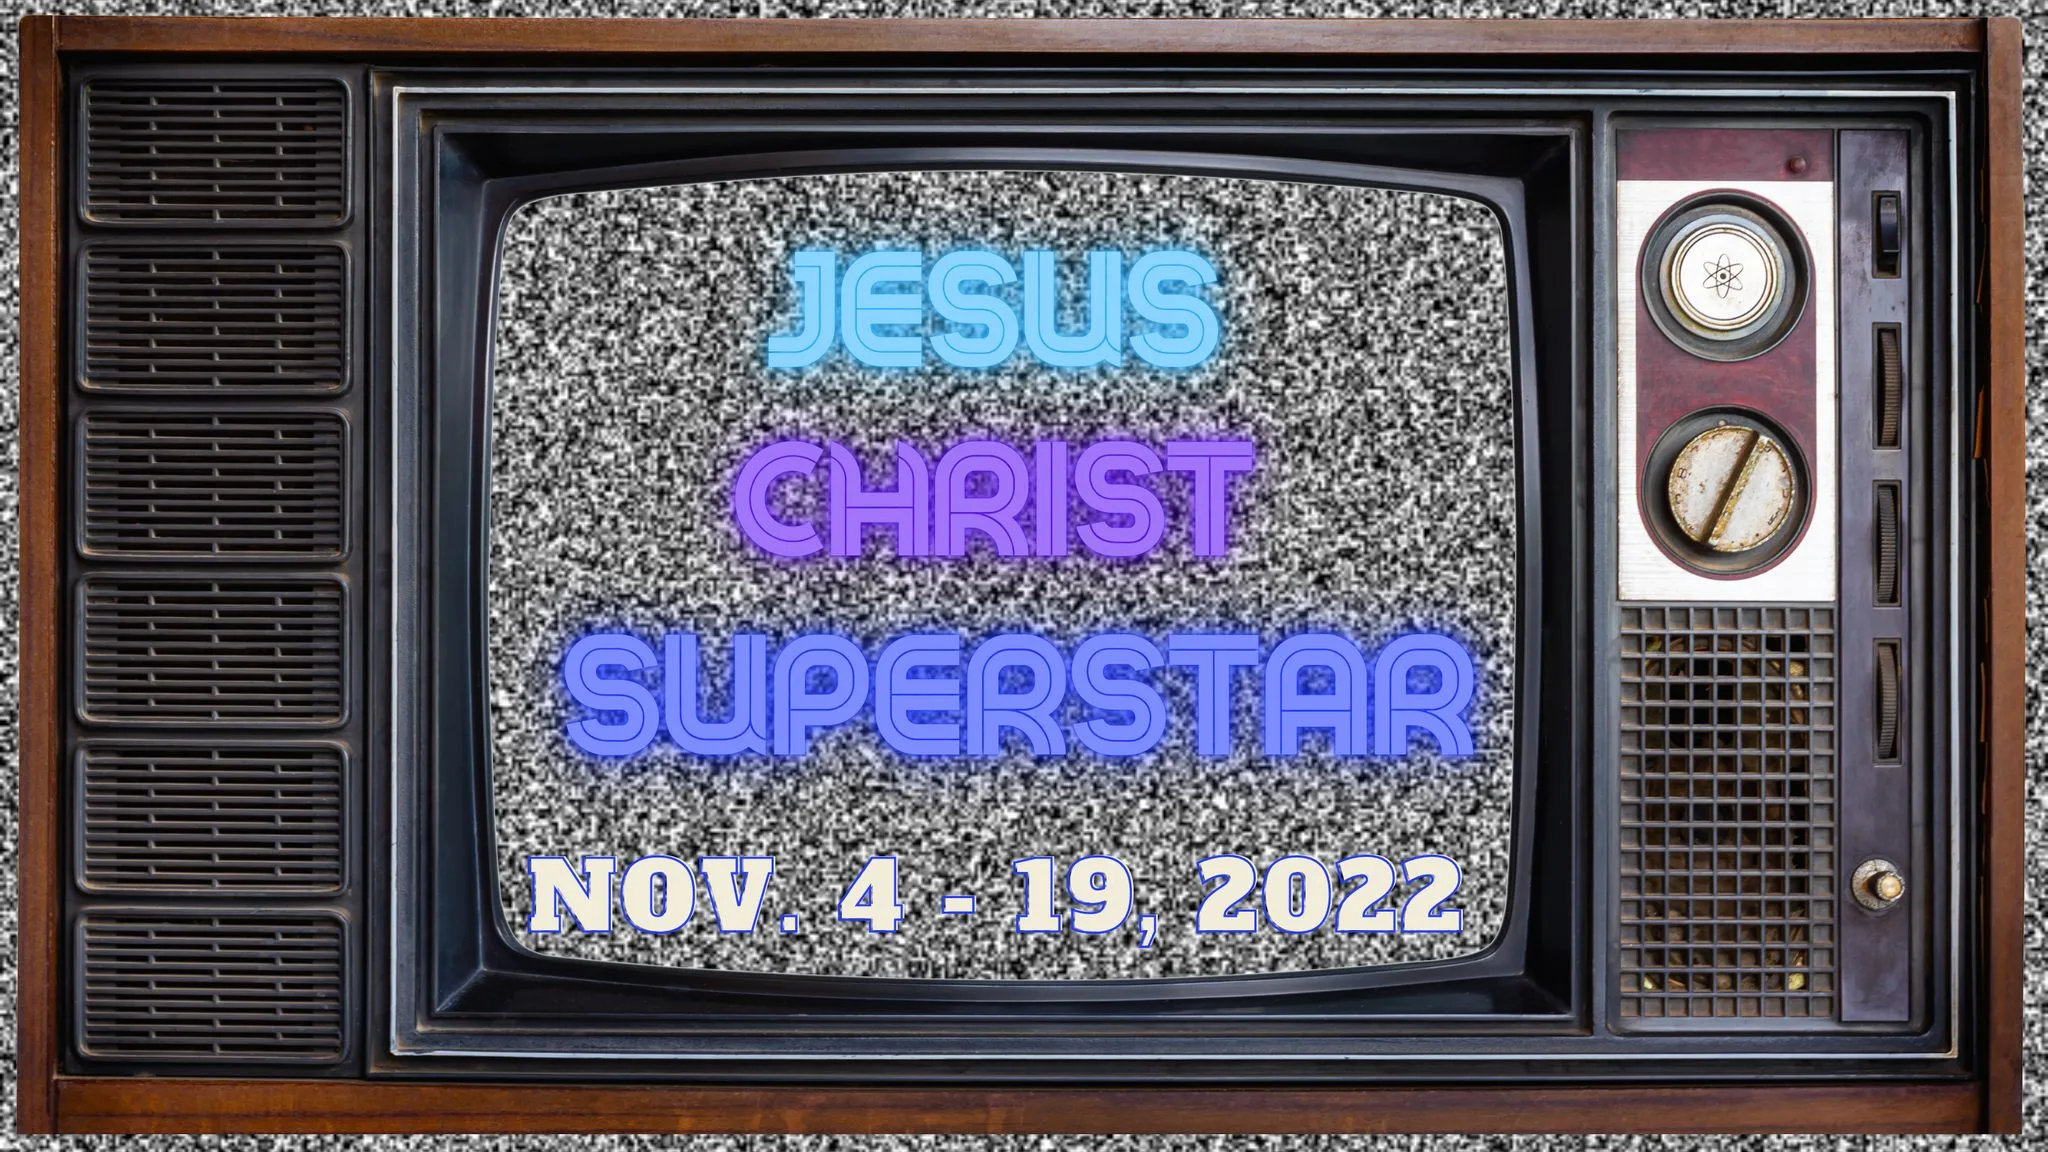 Jesus Christ Superstar Title in television screen with static